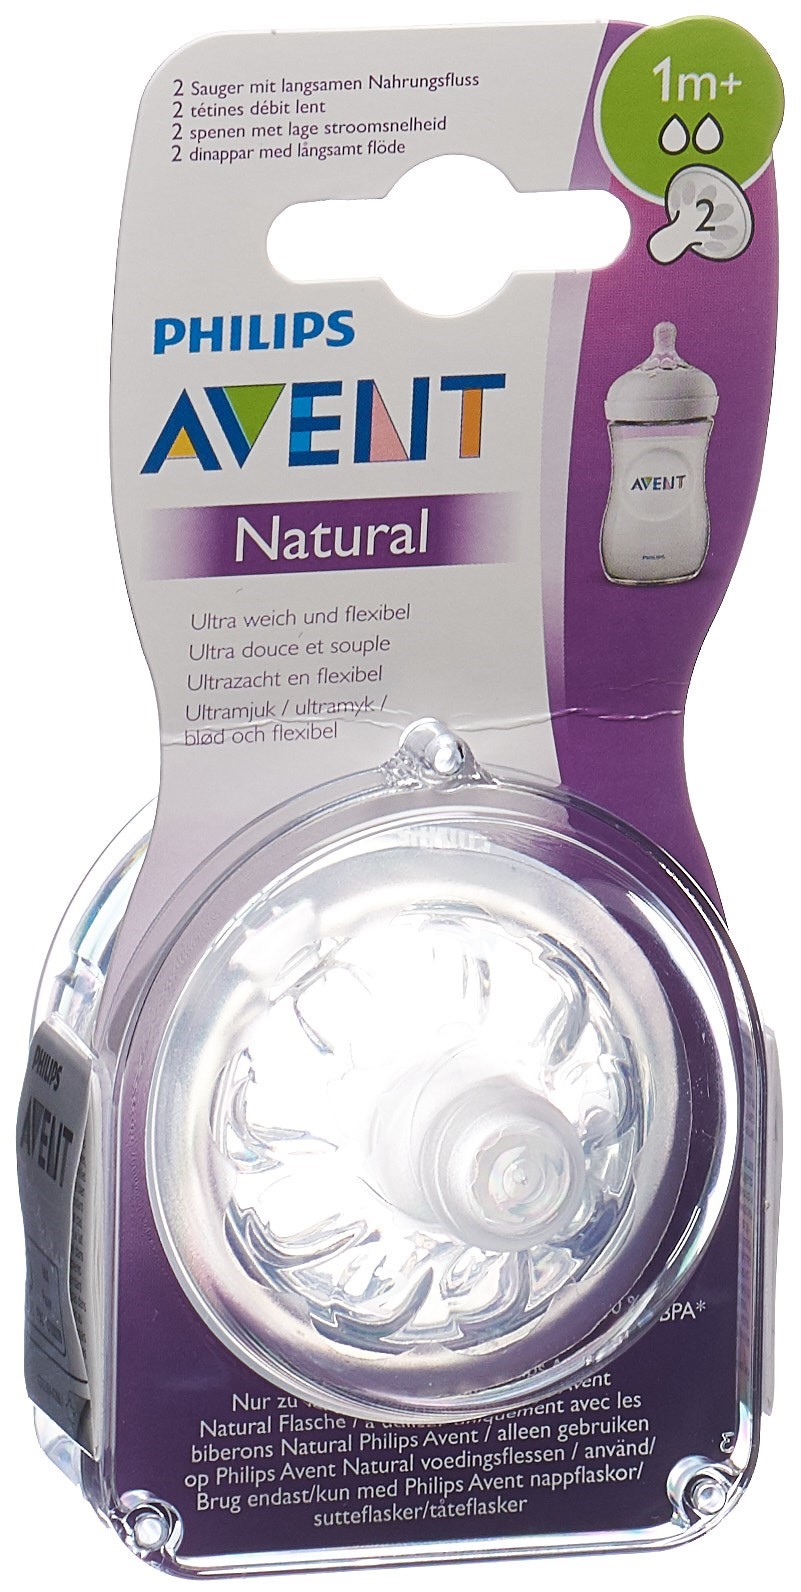 PHILIPS AVENT Natural Sauger 2 1M 2 Stk